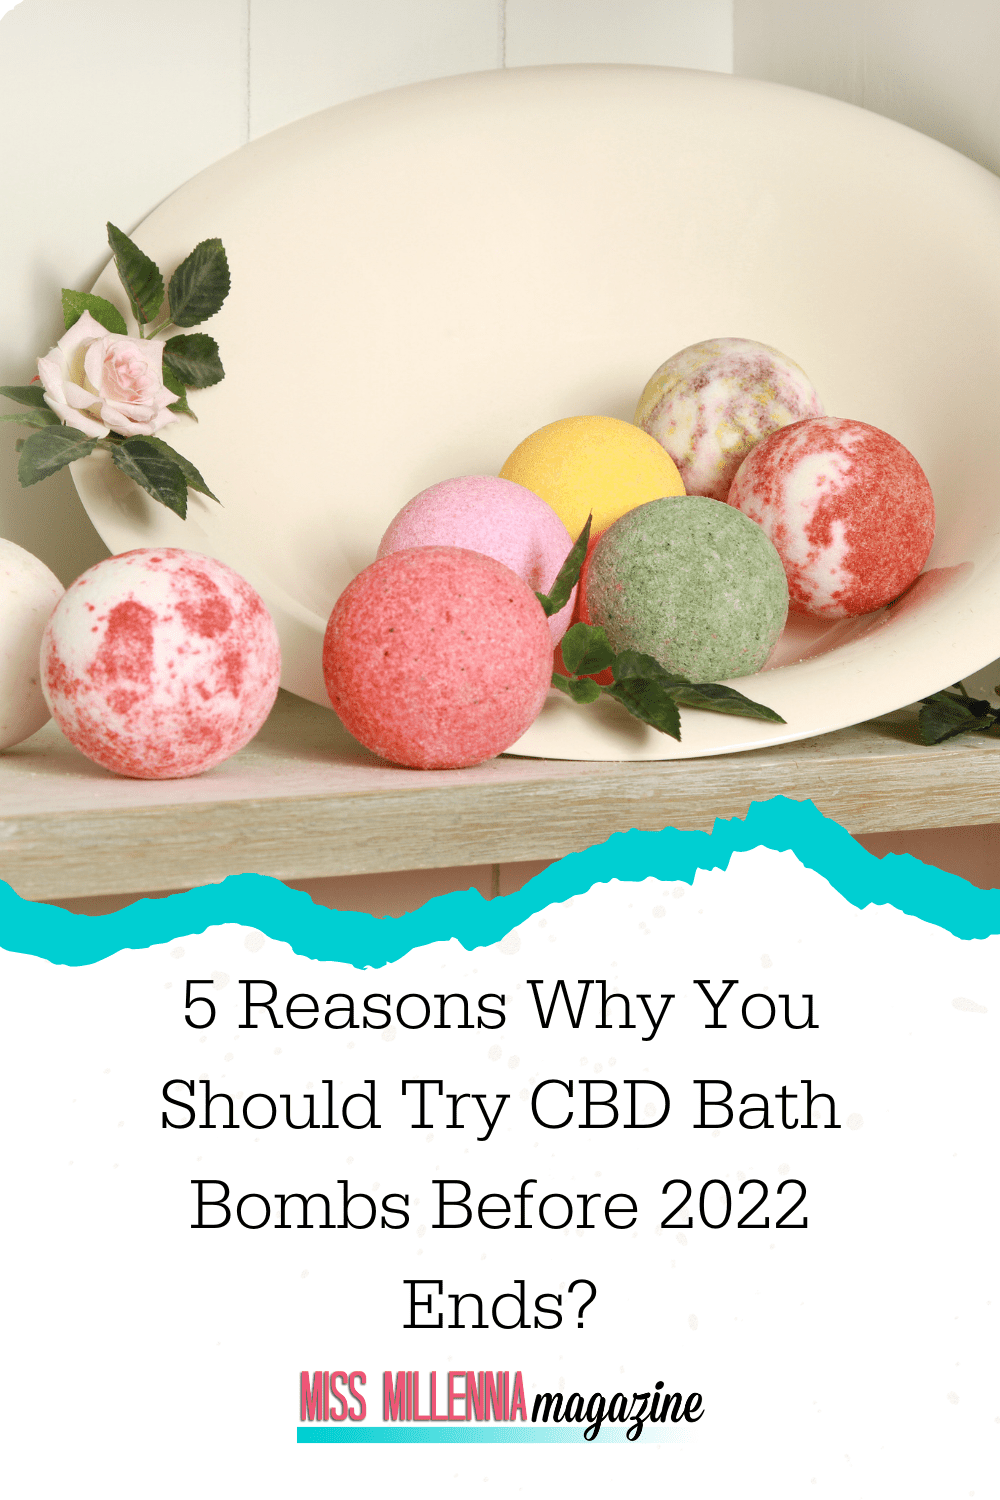 5 Reasons Why You Should Try CBD Bath Bombs Before 2022 Ends?